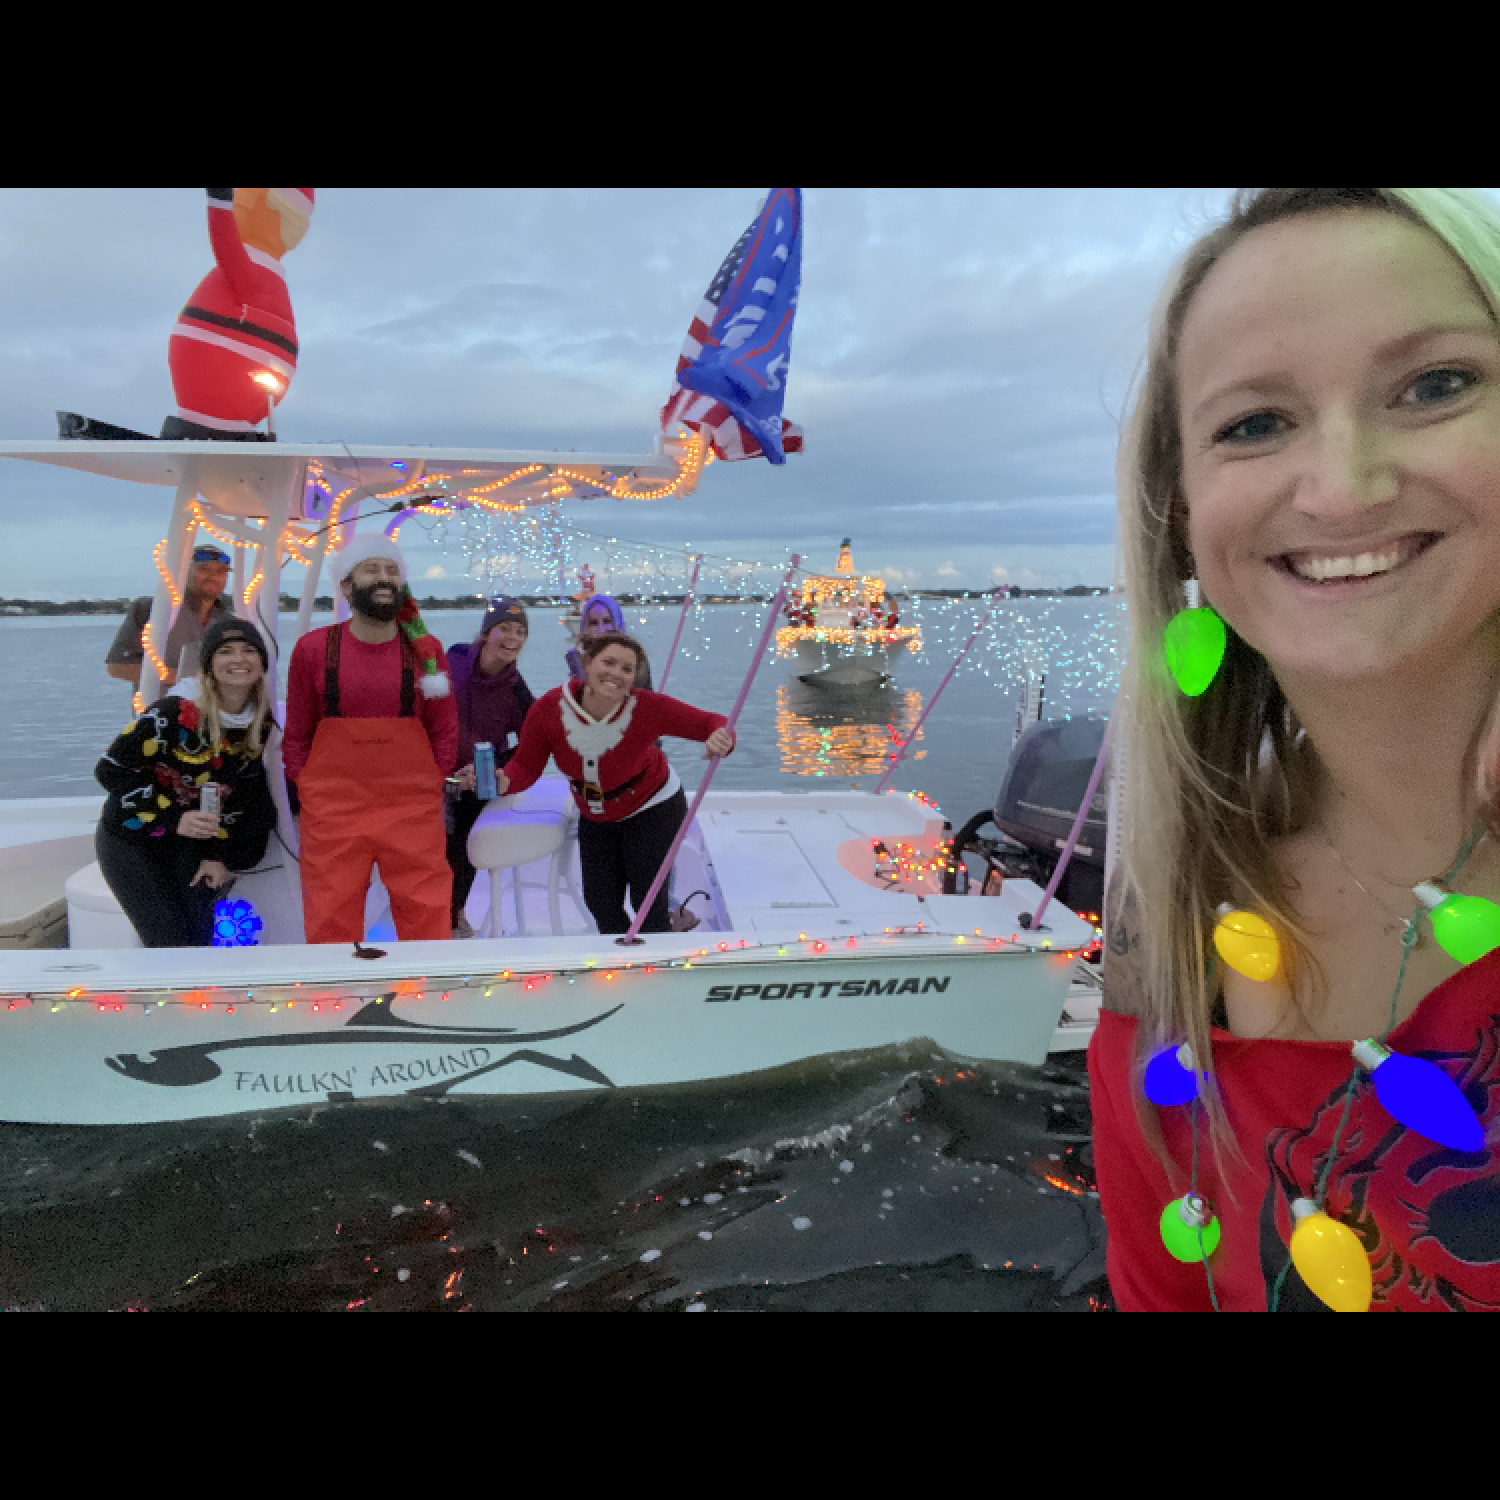 Merry Christmas from the boat parade!